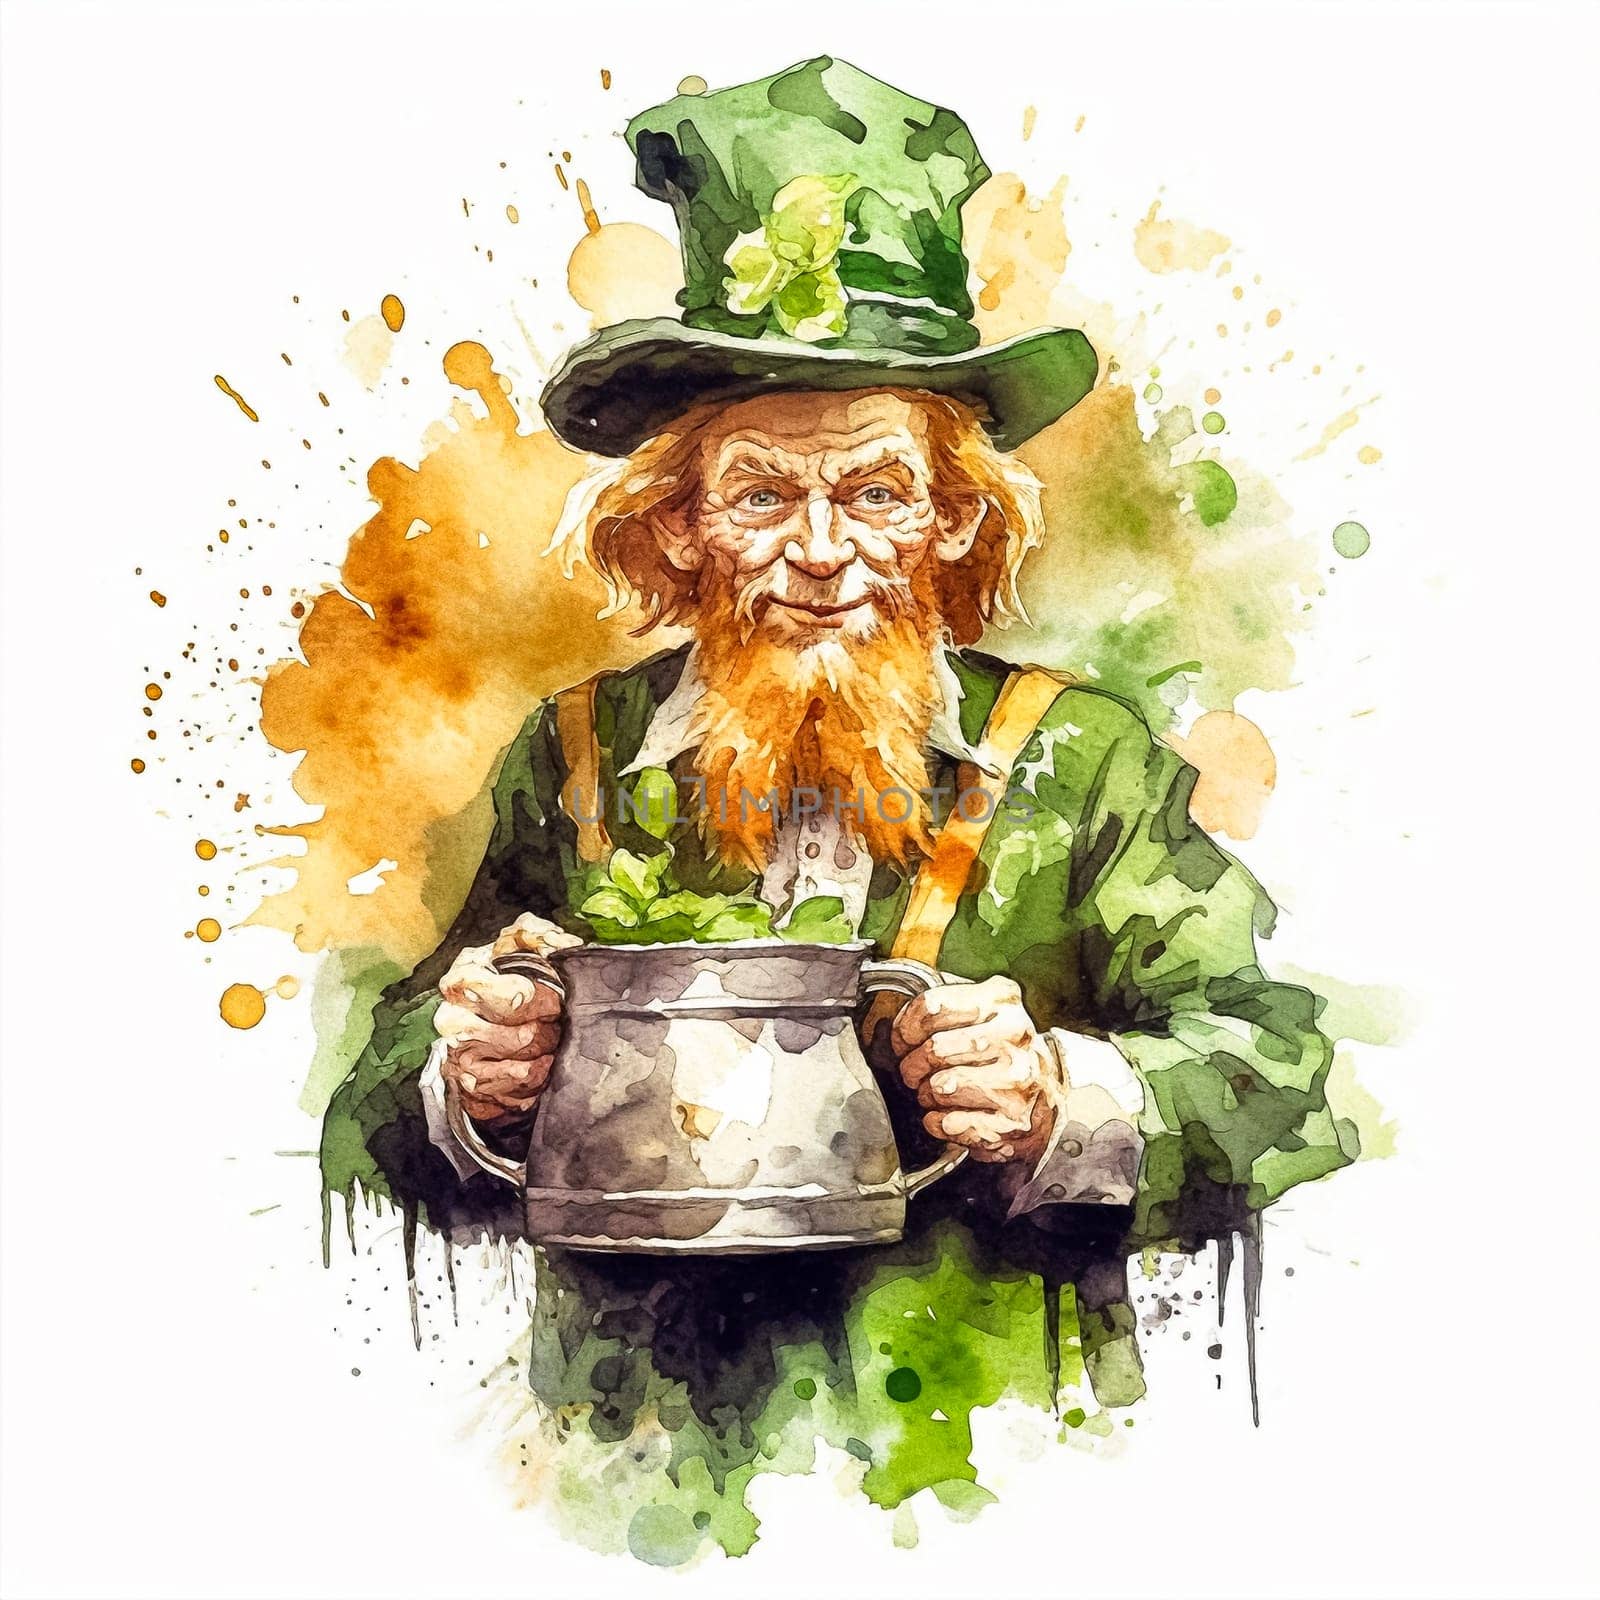 watercolor image featuring a playful leprechaun adorned in charming green attire and hat by Alla_Morozova93